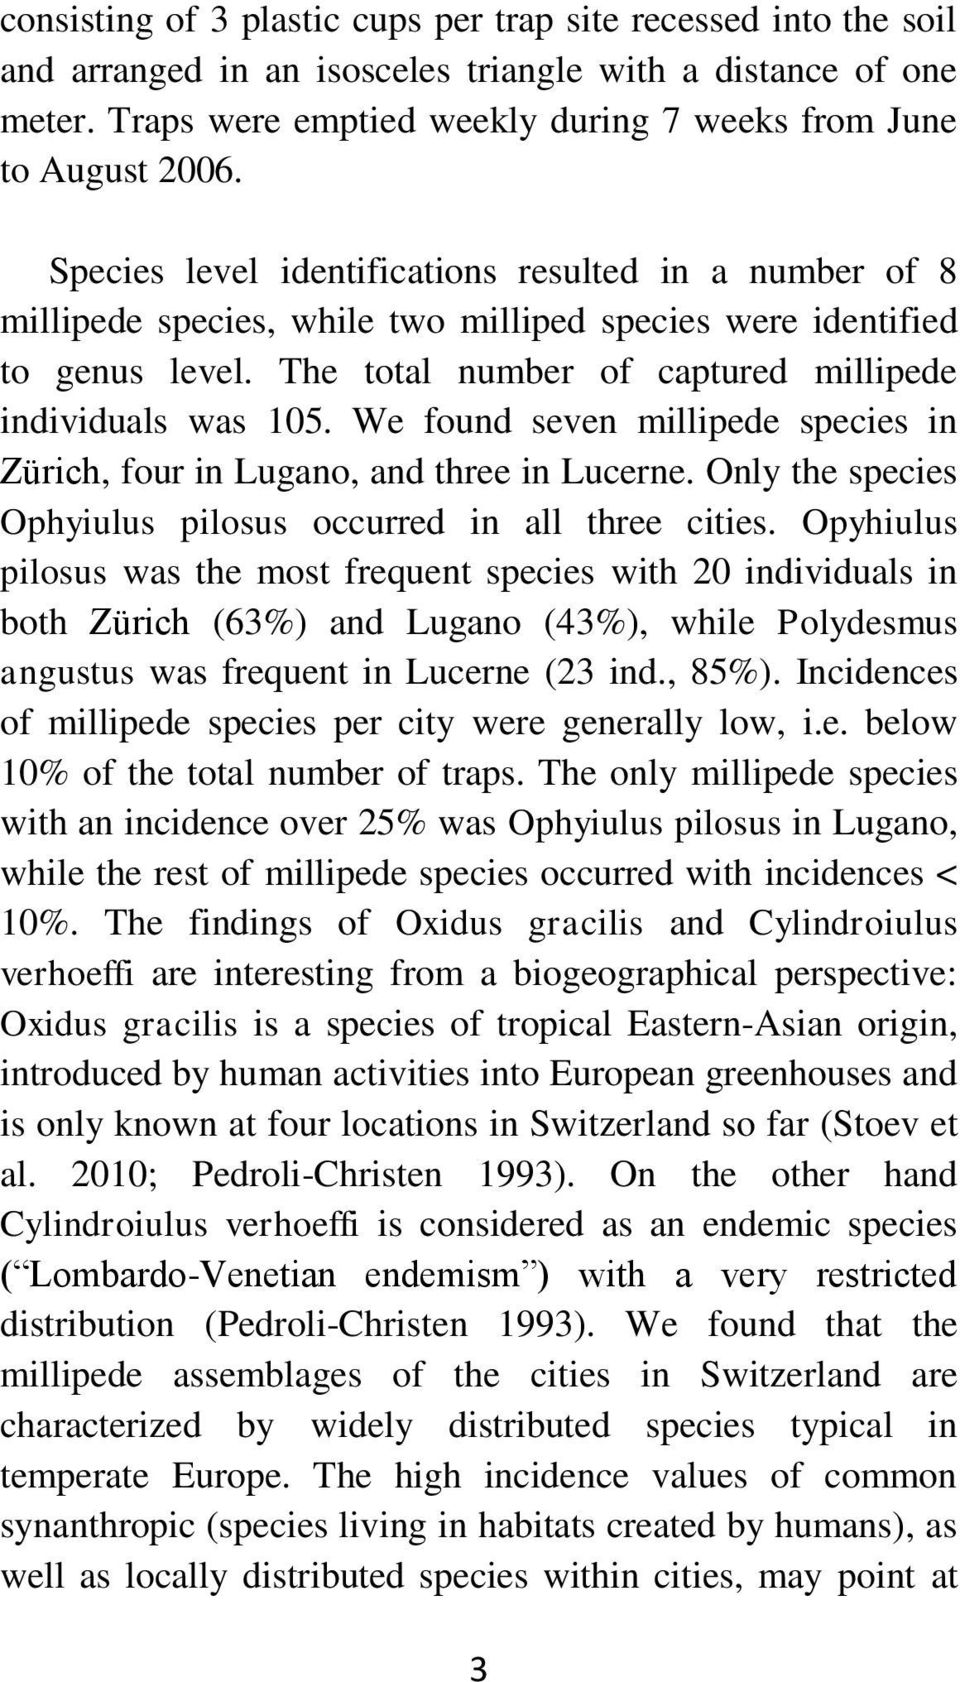 We found seven millipede species in Zürich, four in Lugano, and three in Lucerne. Only the species Ophyiulus pilosus occurred in all three cities.